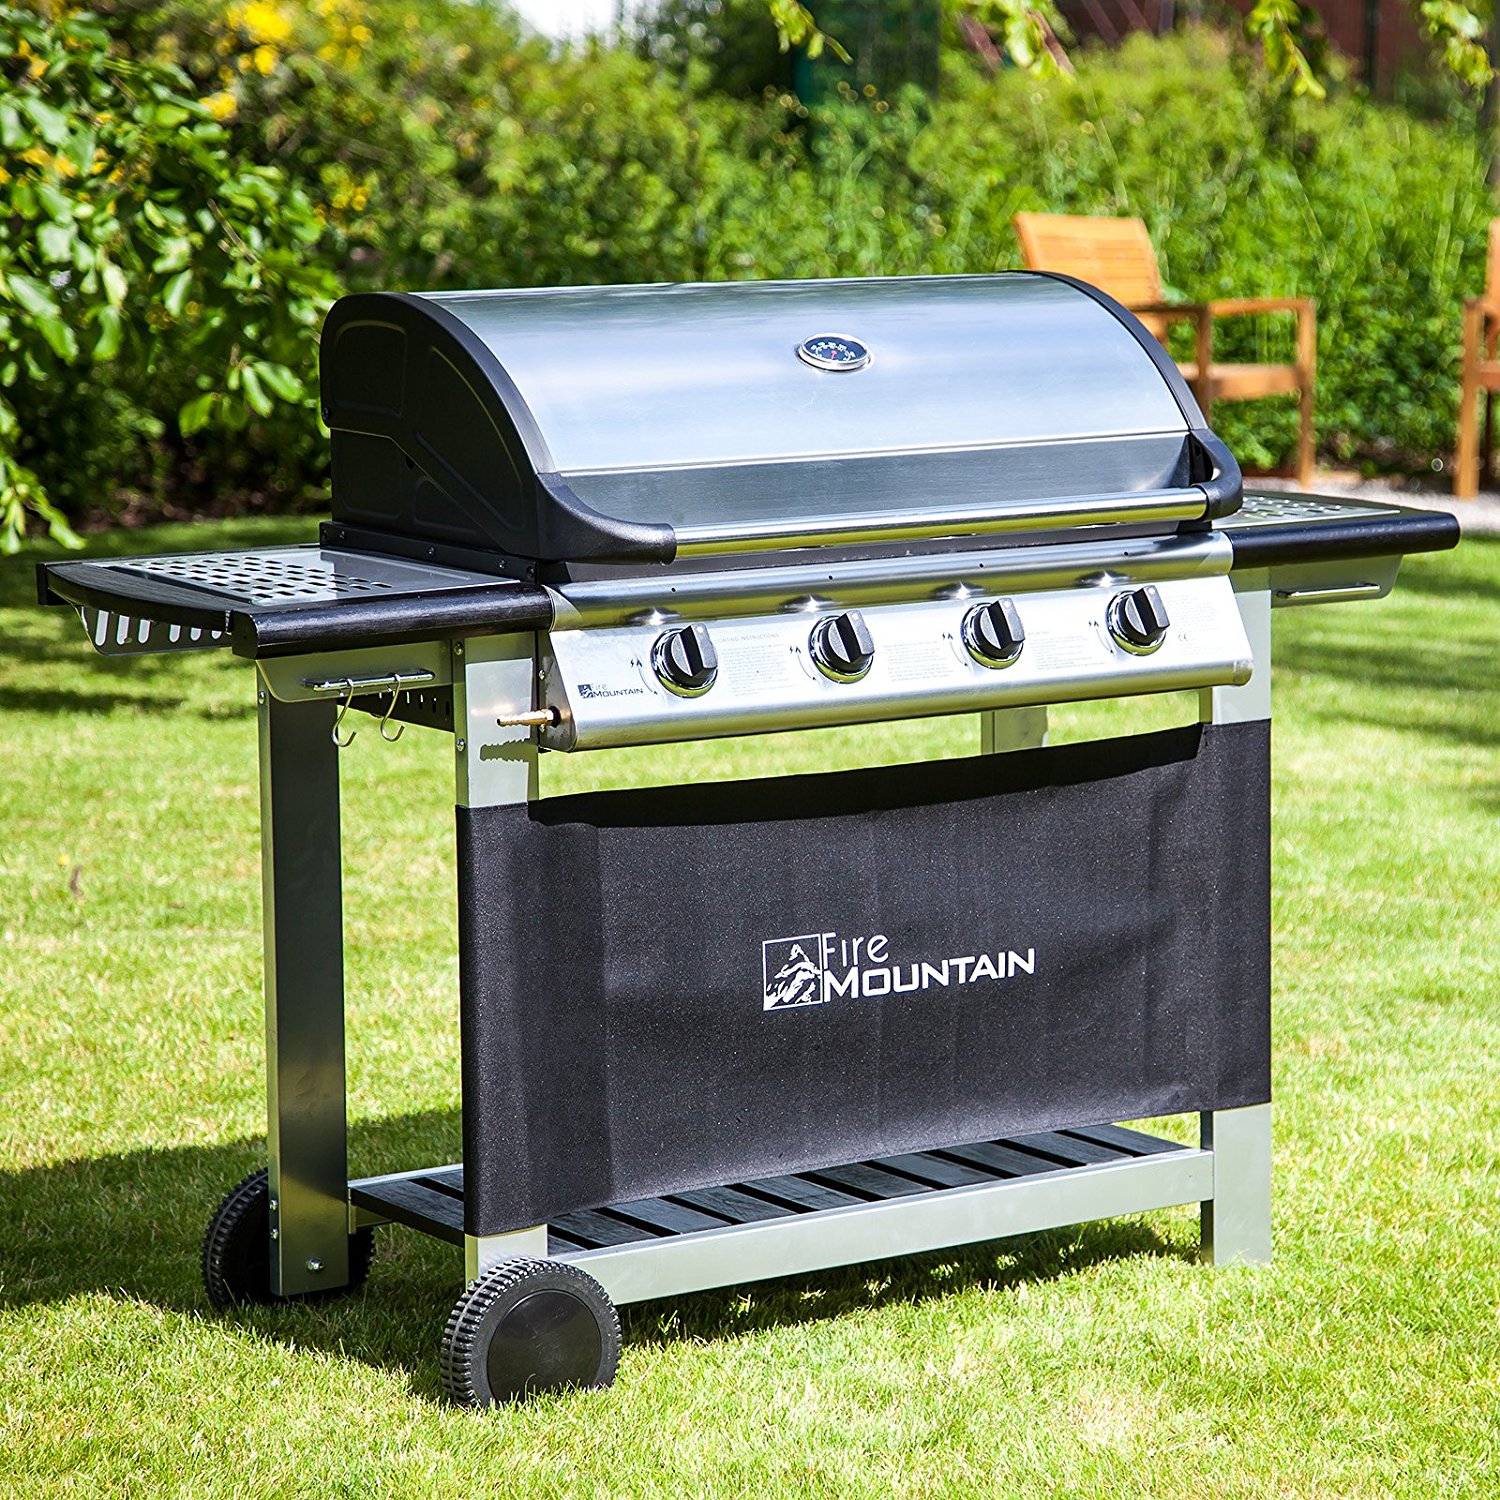 Best Gas Barbecue 2018 - The Ultimate Guide - Greatest Reviews